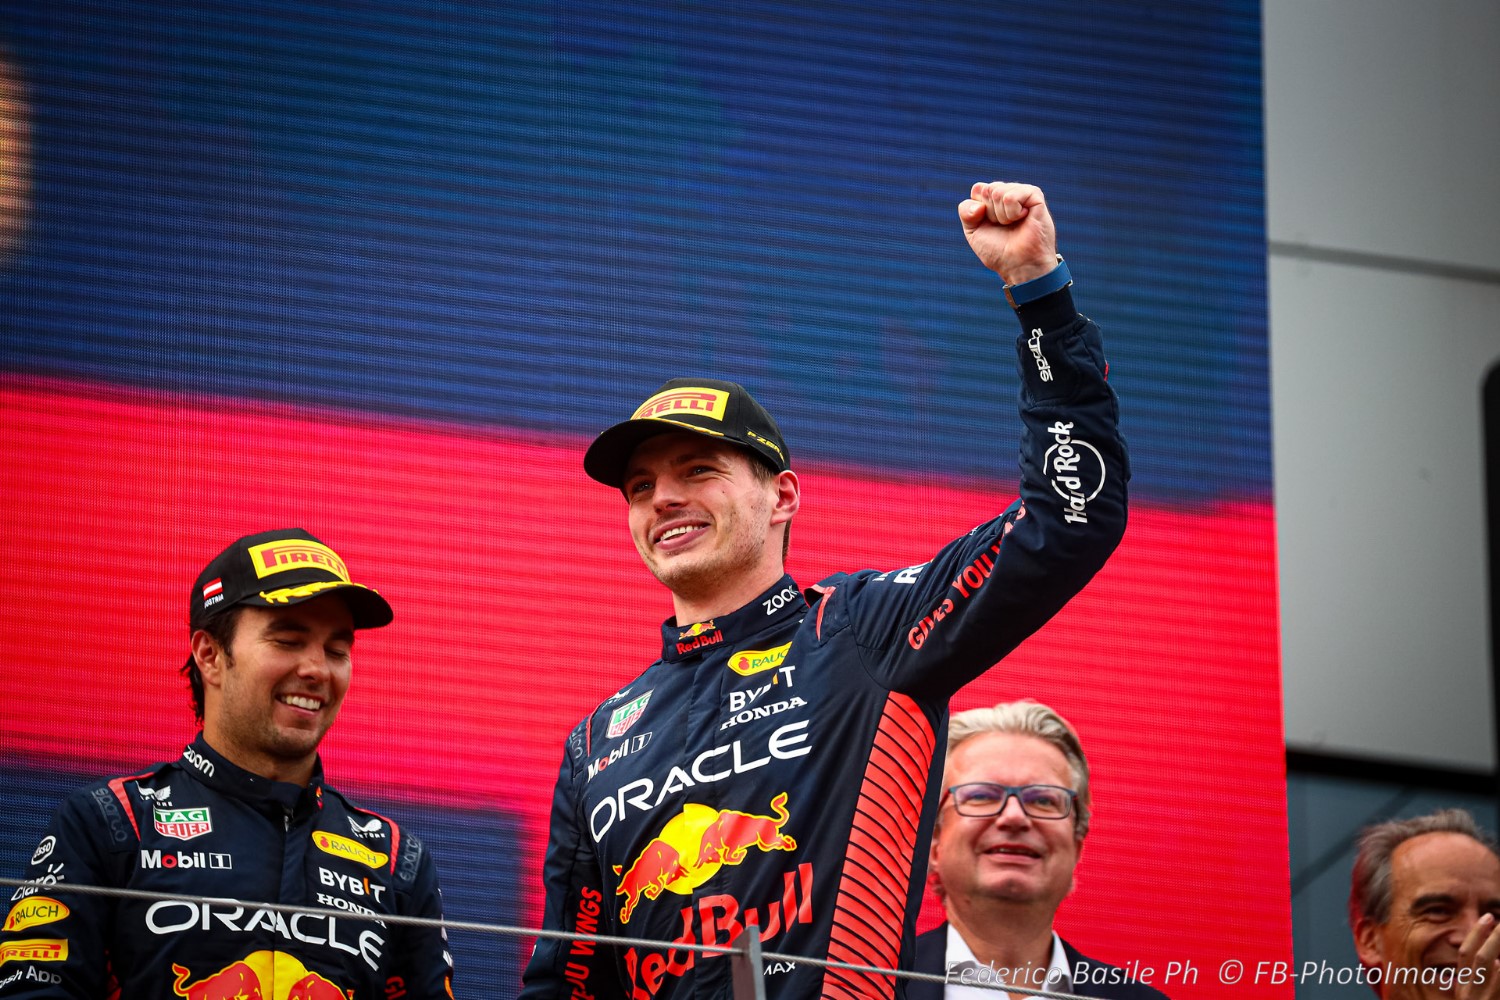 #1 Max Verstappen (NED) Red Bull Racing Honda on the podium during the Austrian GP, Spielberg 29 June-2 July 2023 at the RedBull Ring, Formula 1 World championship 2023.